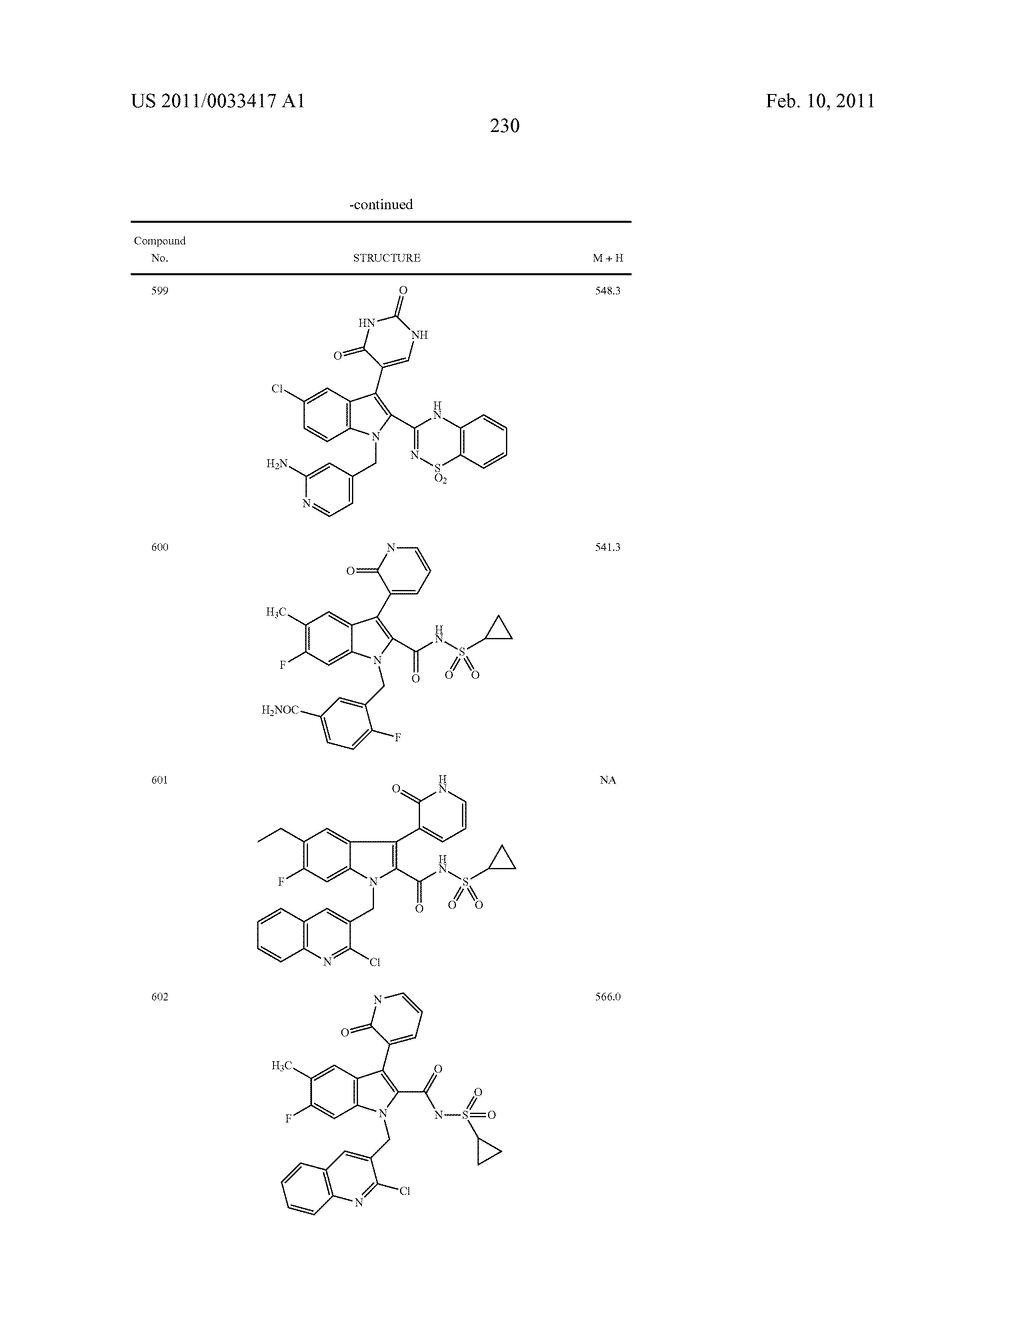 2,3-SUBSTITUTED INDOLE DERIVATIVES FOR TREATING VIRAL INFECTIONS - diagram, schematic, and image 231